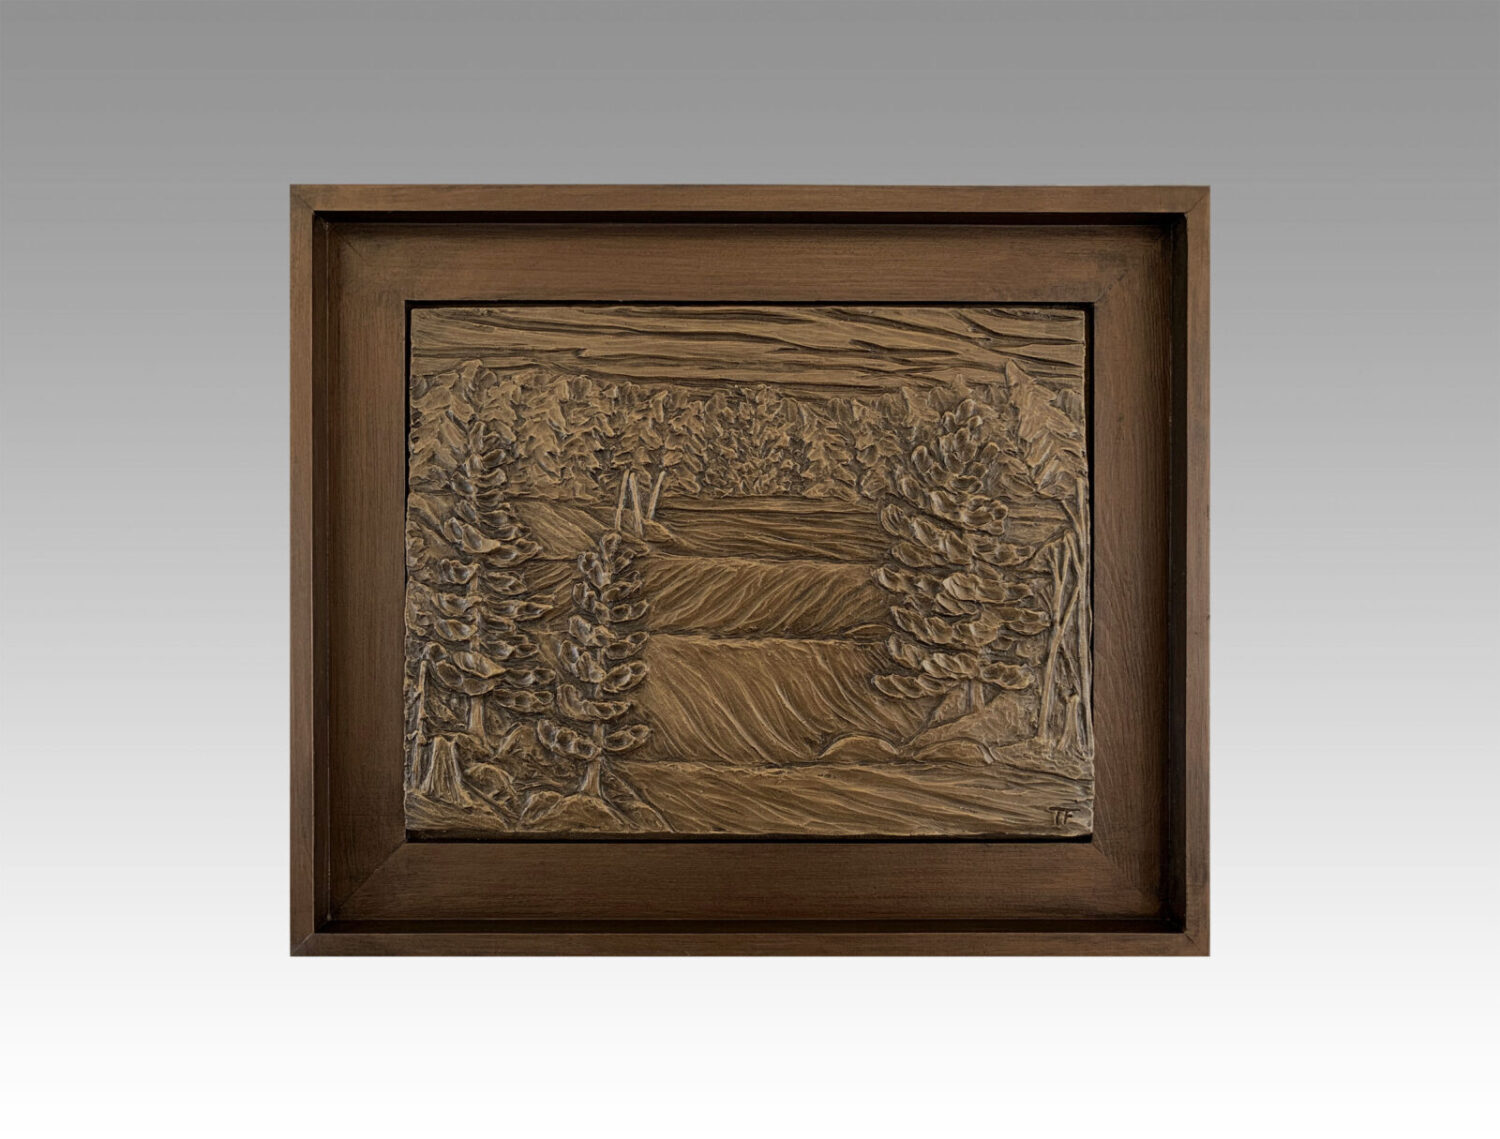 Gallery, Fall at High Falls, $325 CAD, Metal Infused, 17 ¼” x 14 ½” (framed), Edition 60, Sculptural Relief of High Falls in Onaping during autumn, Sculptor Tyler Fauvelle